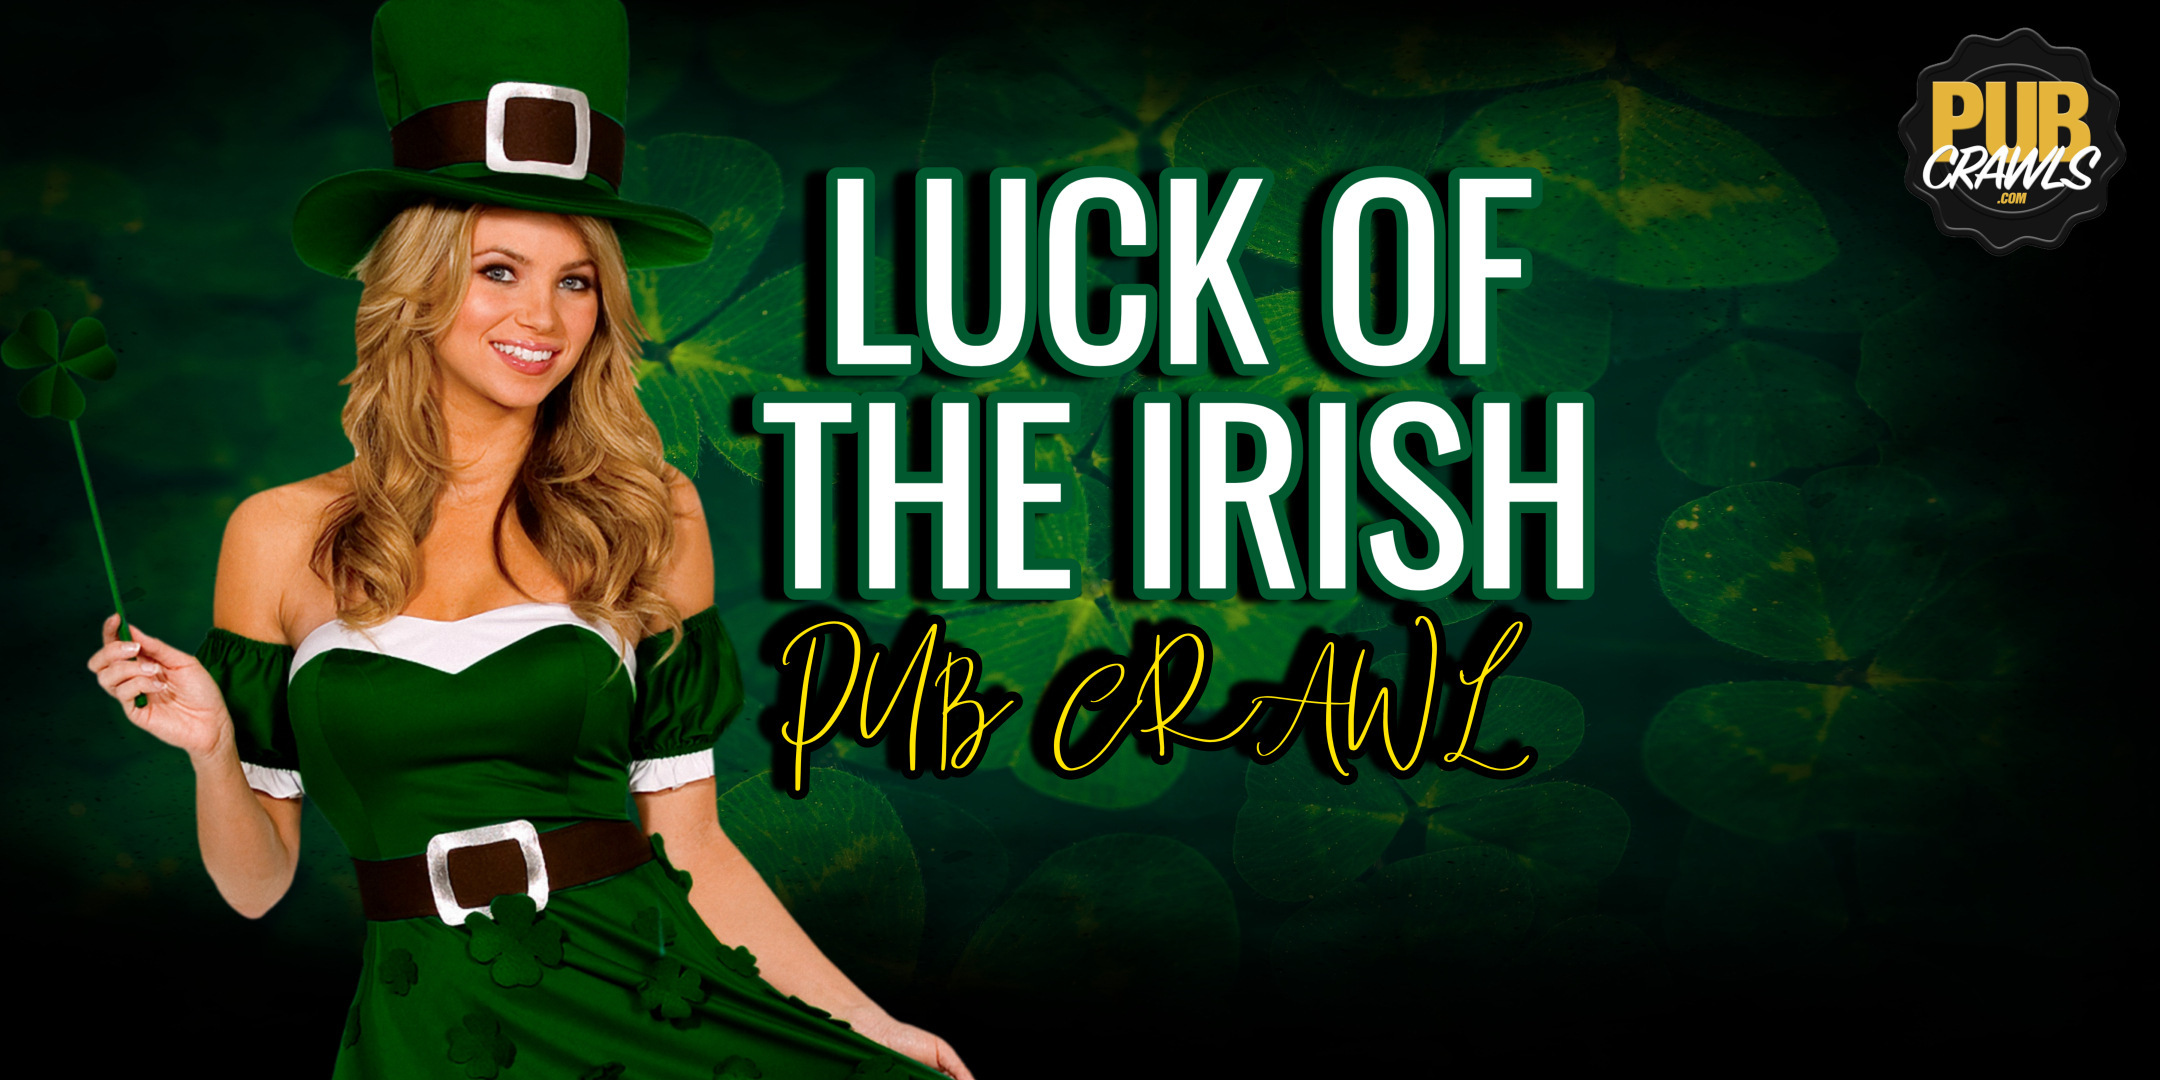  Fort Worth Official St. Patrick's Day Pub Crawl